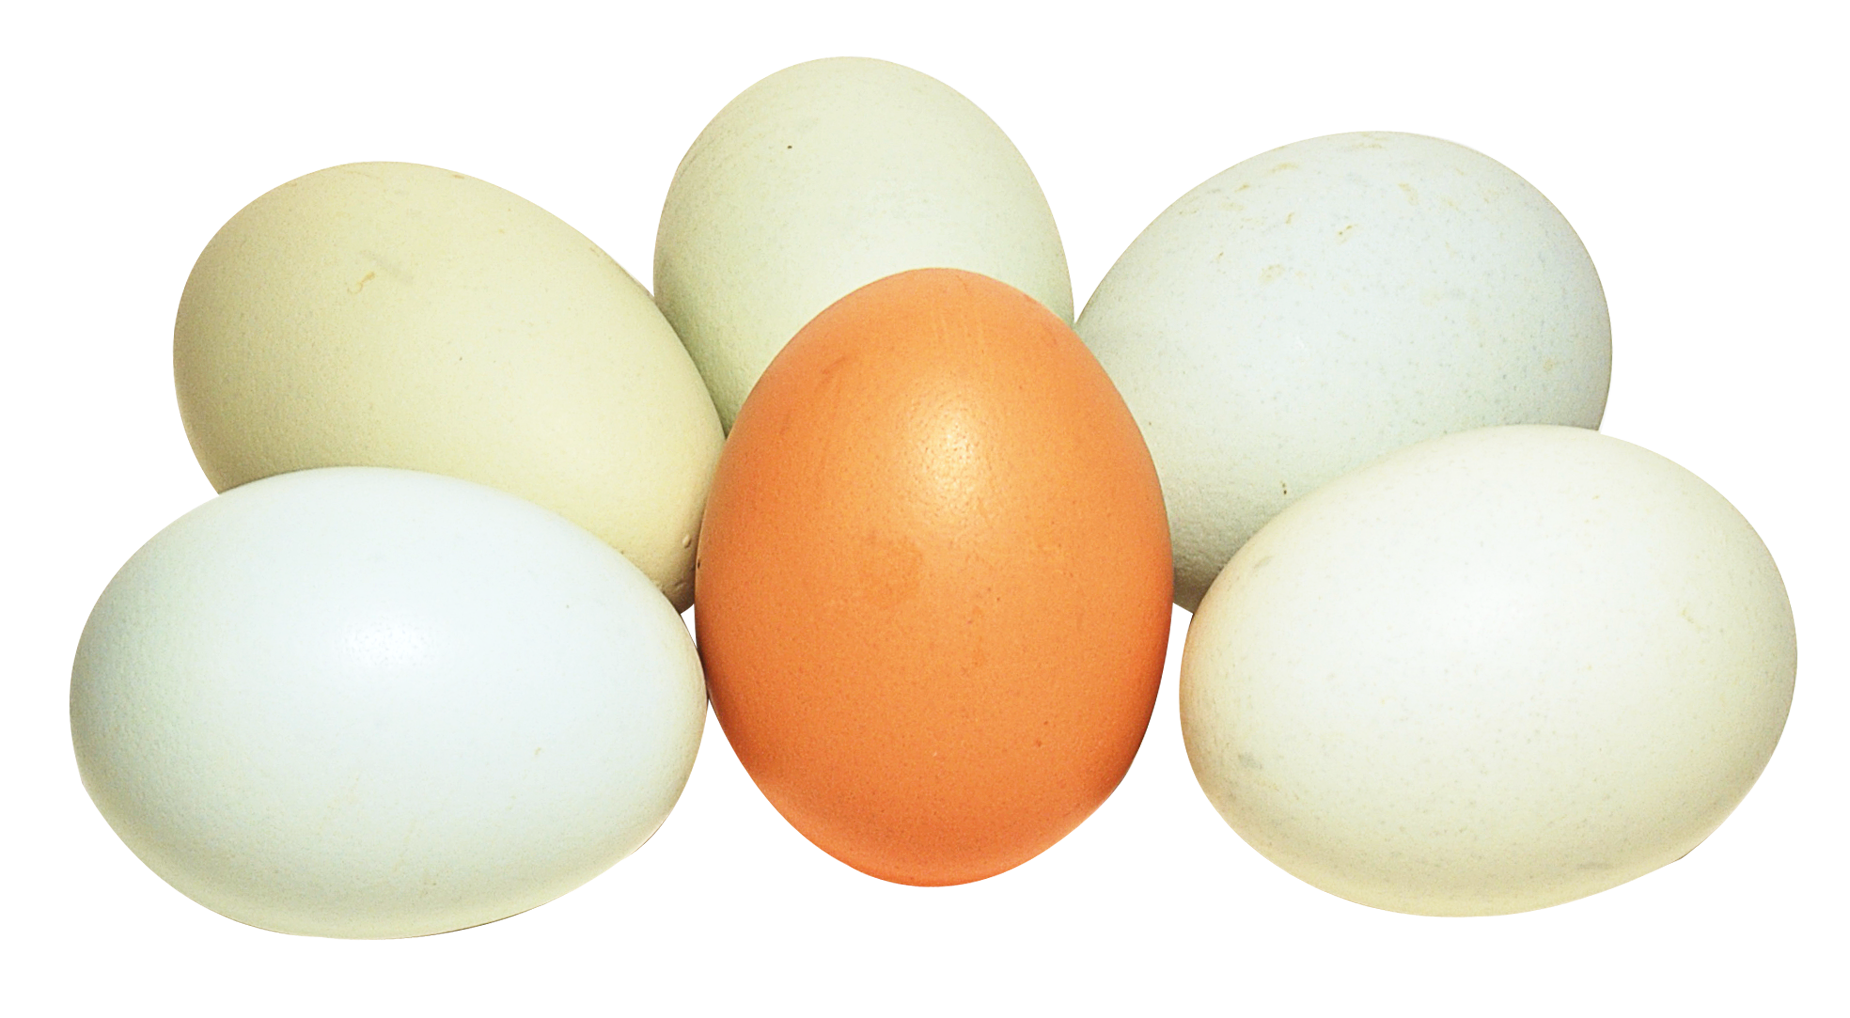 A Group Of Eggs With One Egg In The Middle